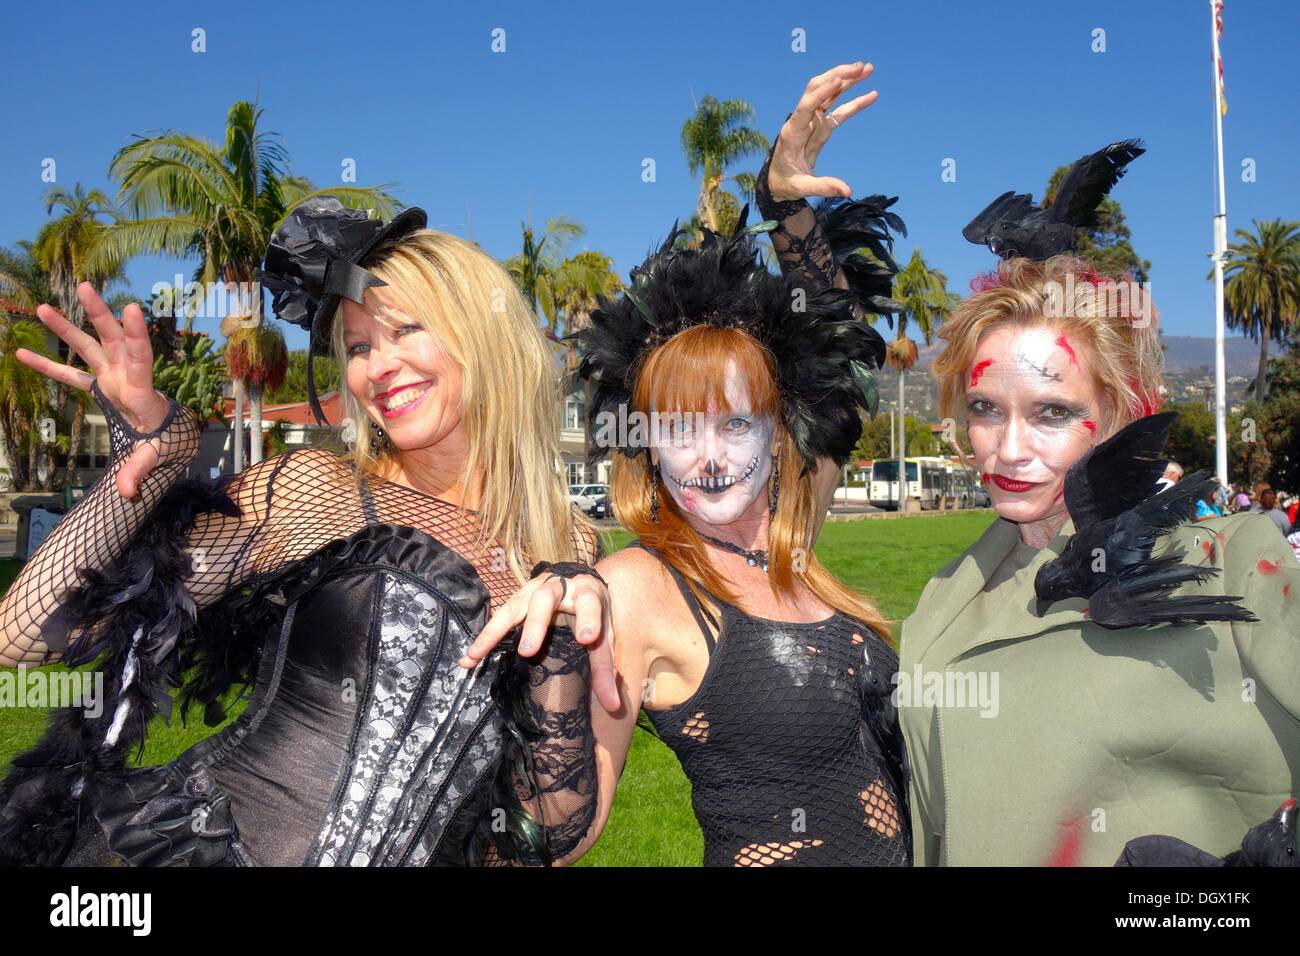 Santa Barbara, California USA – 26 October 2013 An estimated 10,000 zombie dancers at over 200 locations in over 25 countries perform Michael Jackson's 'Thriller' six minute dance at the same exact time at the 8th annual “Thrill The World” Halloween charity event. The Santa Barbara Courthouse Sunken Gardens $35 participation fee raises money for educational programs in Rwanda. Photo left to right: Teresa, Tracy and Beth all from Santa Barbara. October 26, 2013 Credit: Lisa Werner/ Alamy Live News Stock Photo